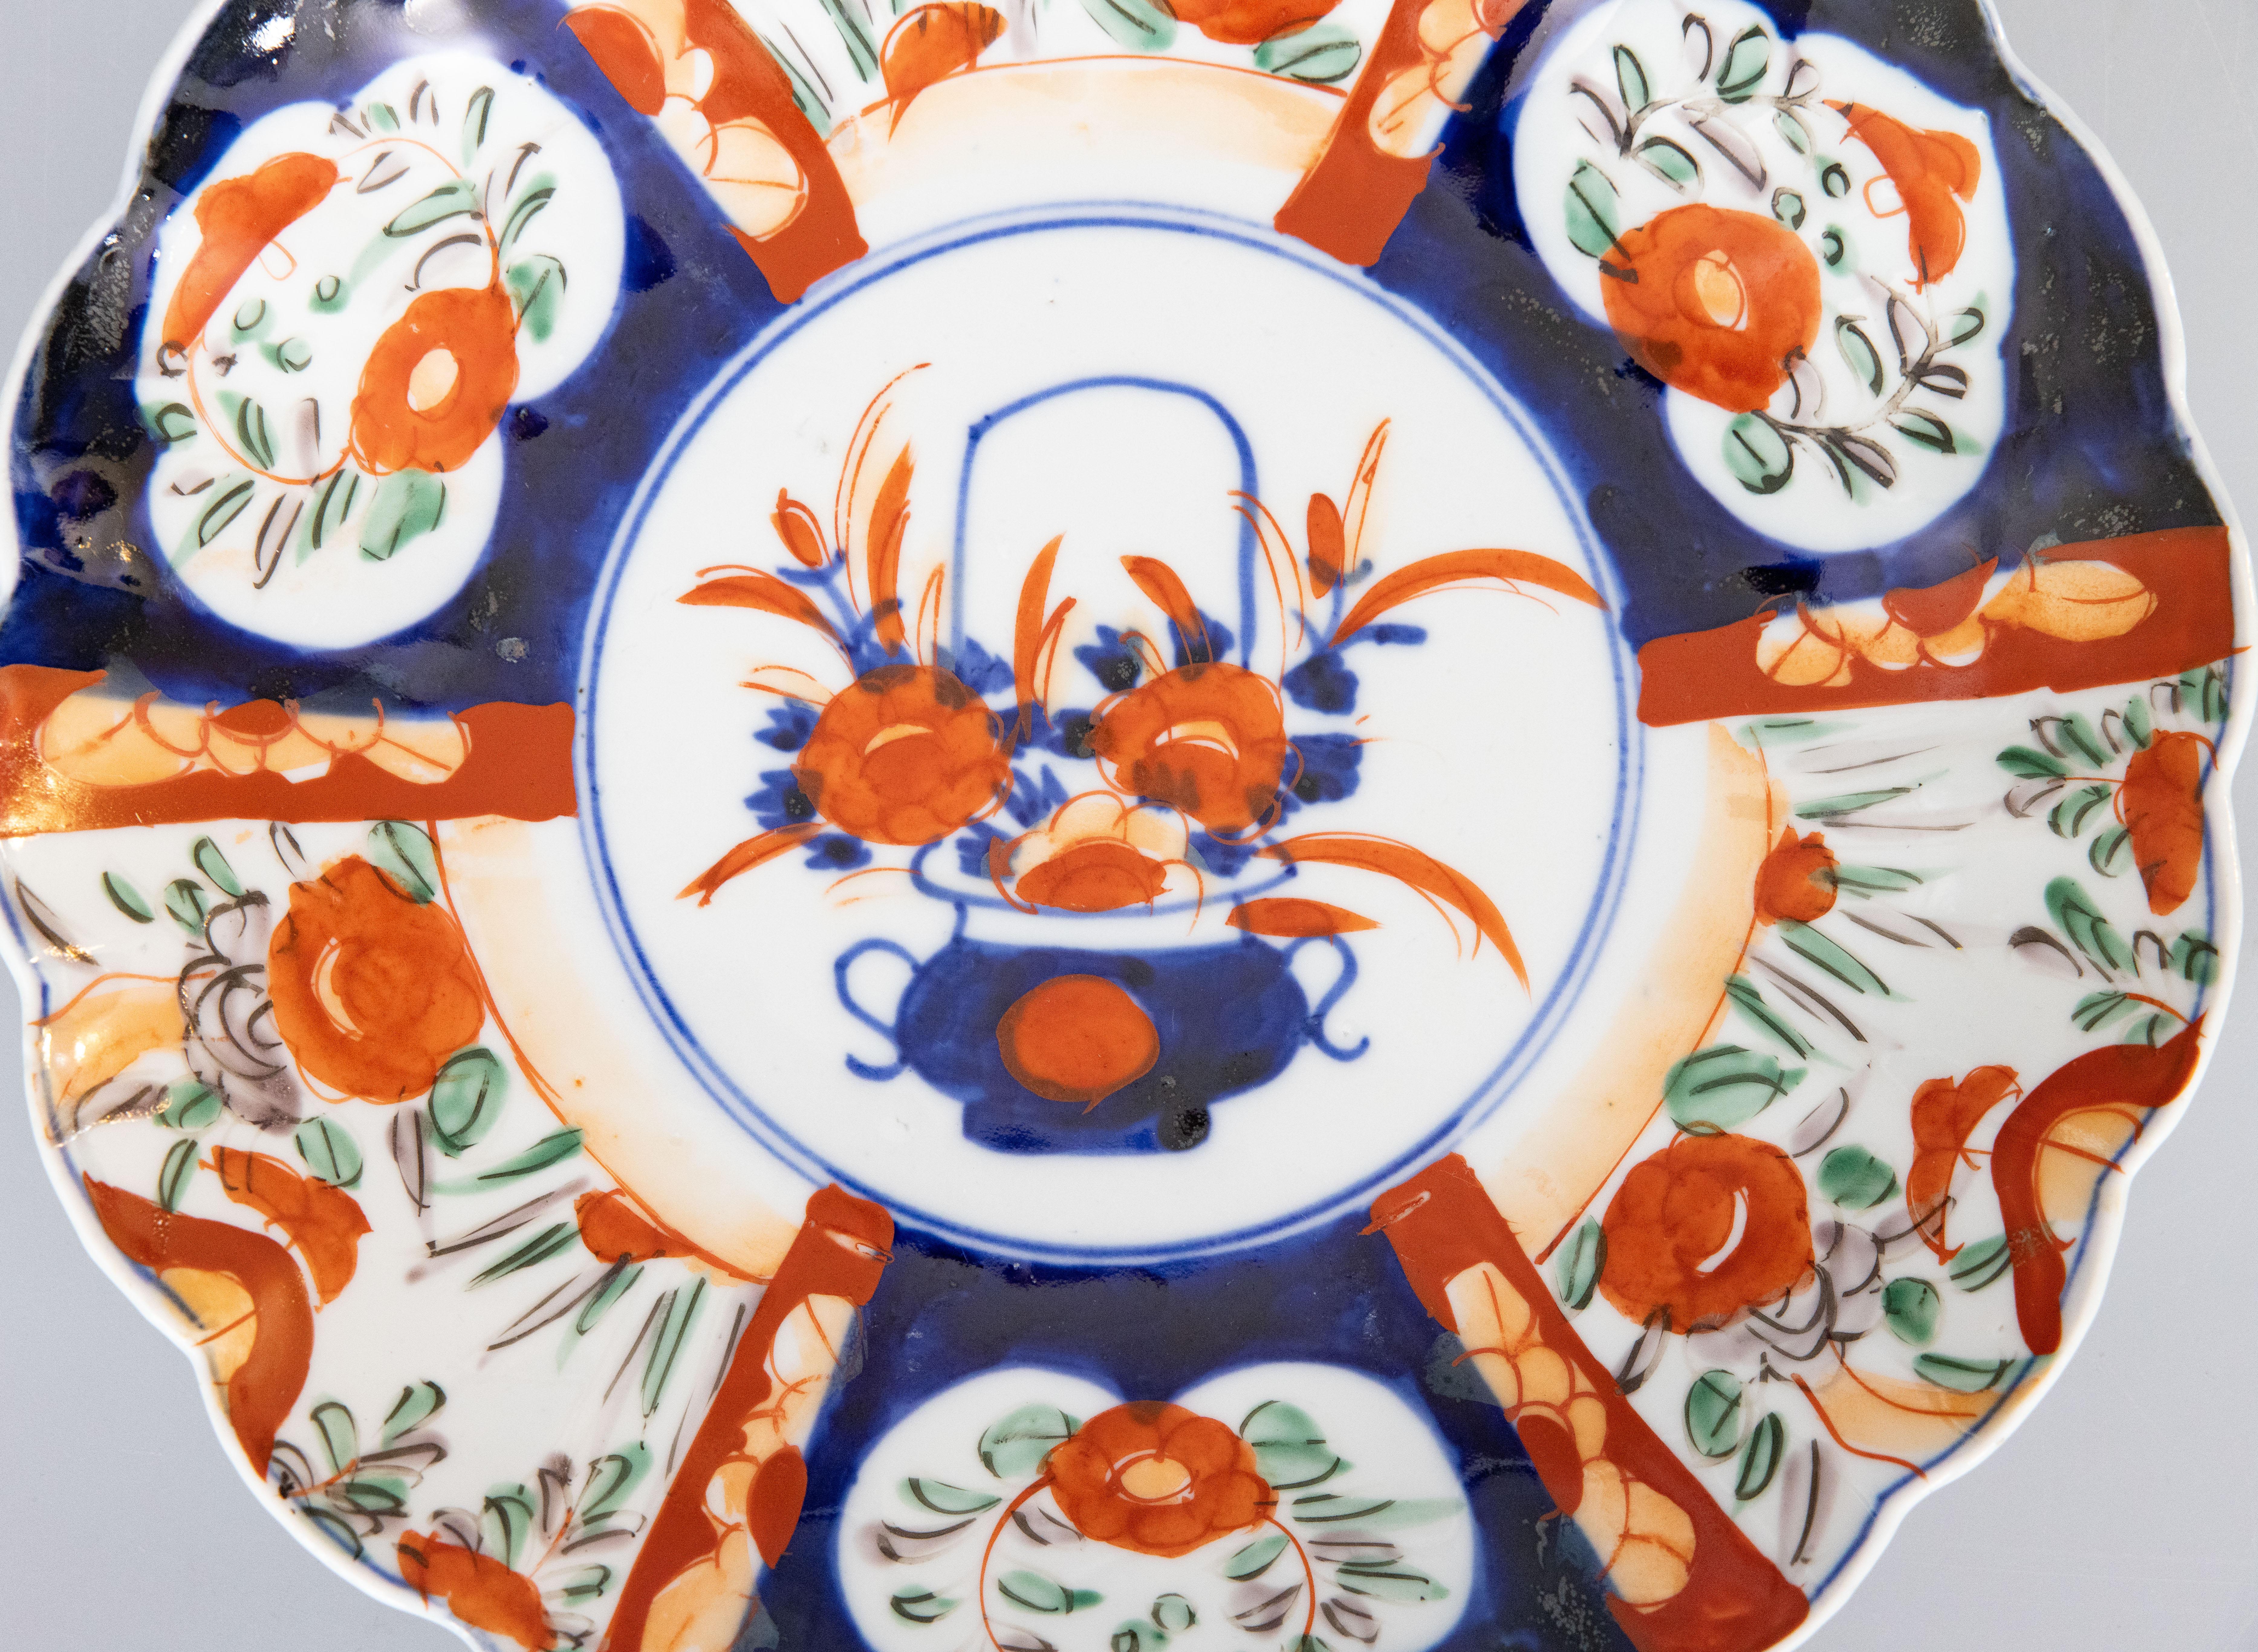 A gorgeous 19th-Century Japanese Meiji Period Imari porcelain charger with a hand painted floral design in the traditional Imari colors. This fine large plate has lovely scalloped edges and is quite heavy, weighing over 2 lbs. It displays